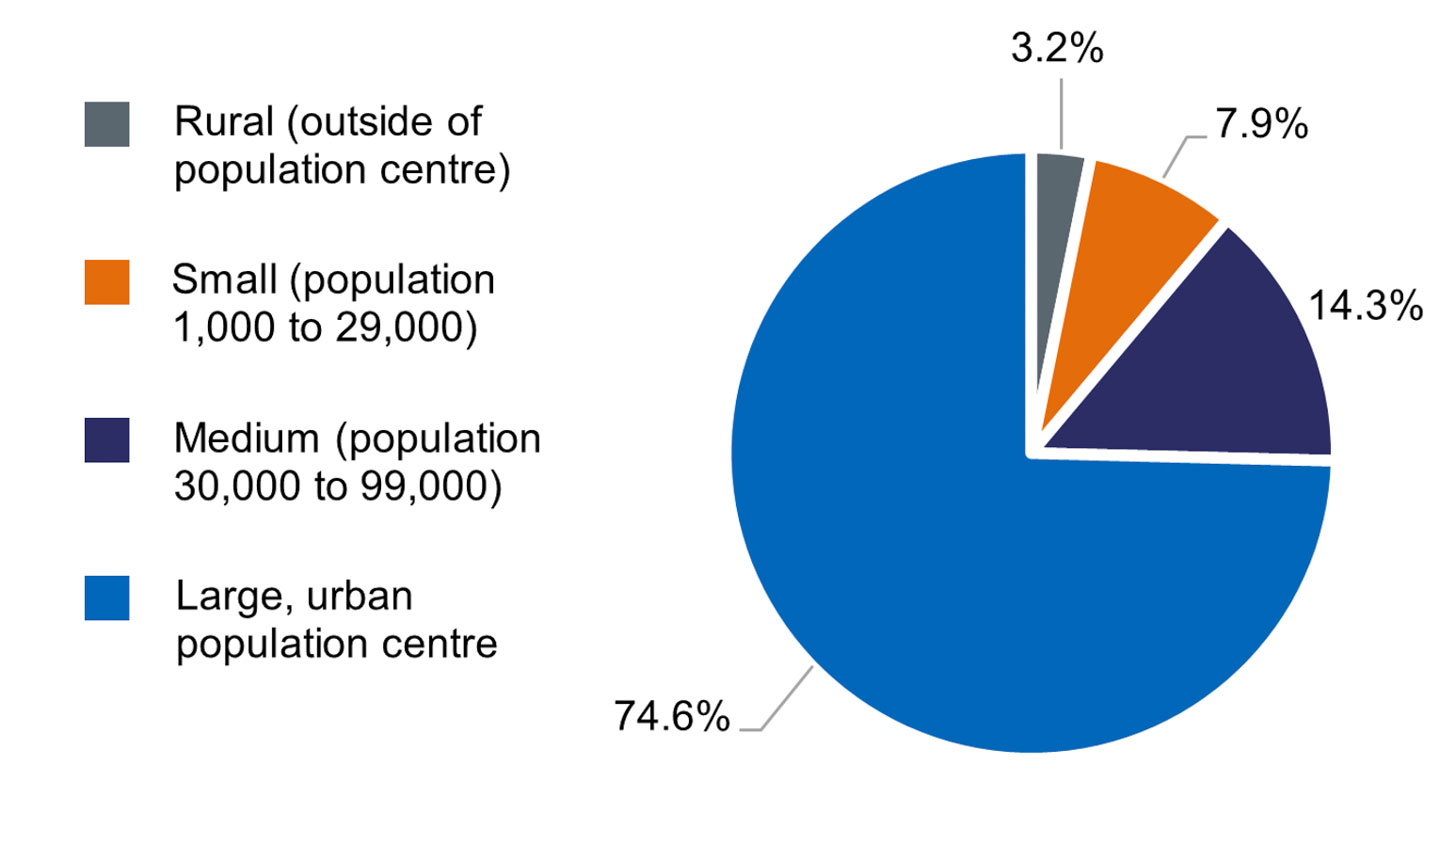 Pie chart showing the proportion of survey respondents based on the size of the population centre in which they live or area that they serve. The majority of respondents lived in large, urban population centres.